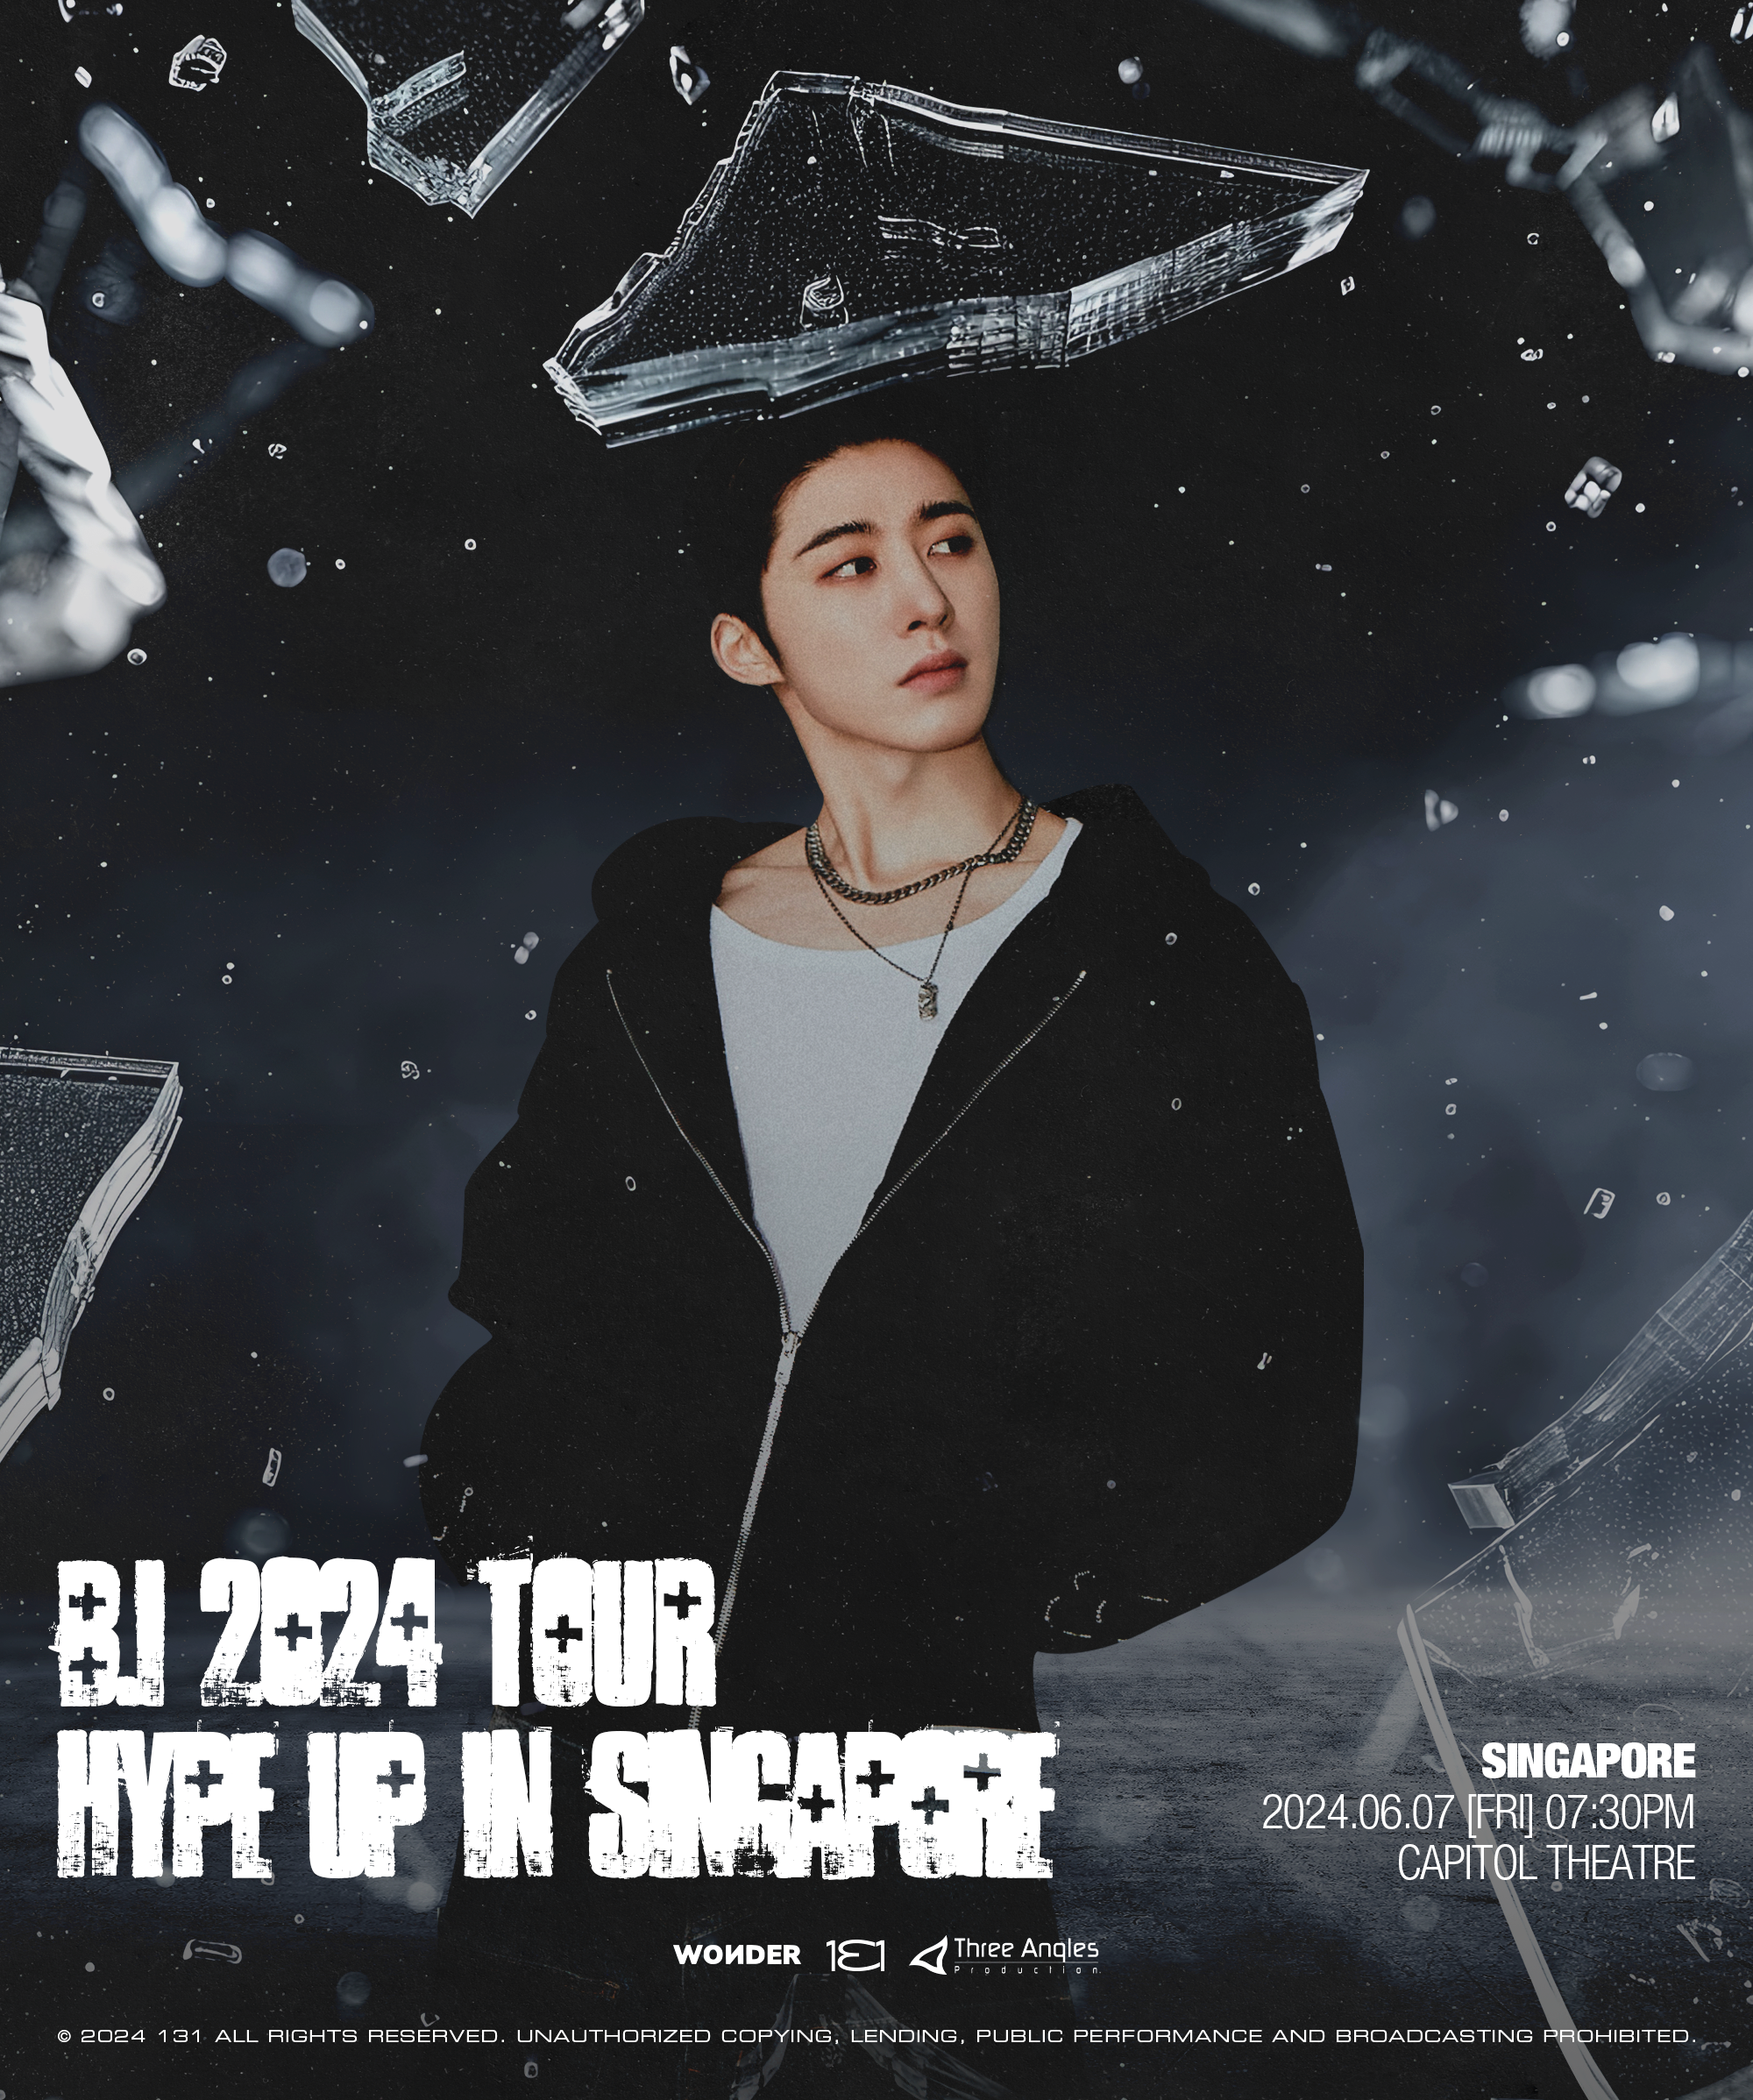 [UPCOMING EVENT] B.I 2024 TOUR ‘HYPE UP’ IN SINGAPORE